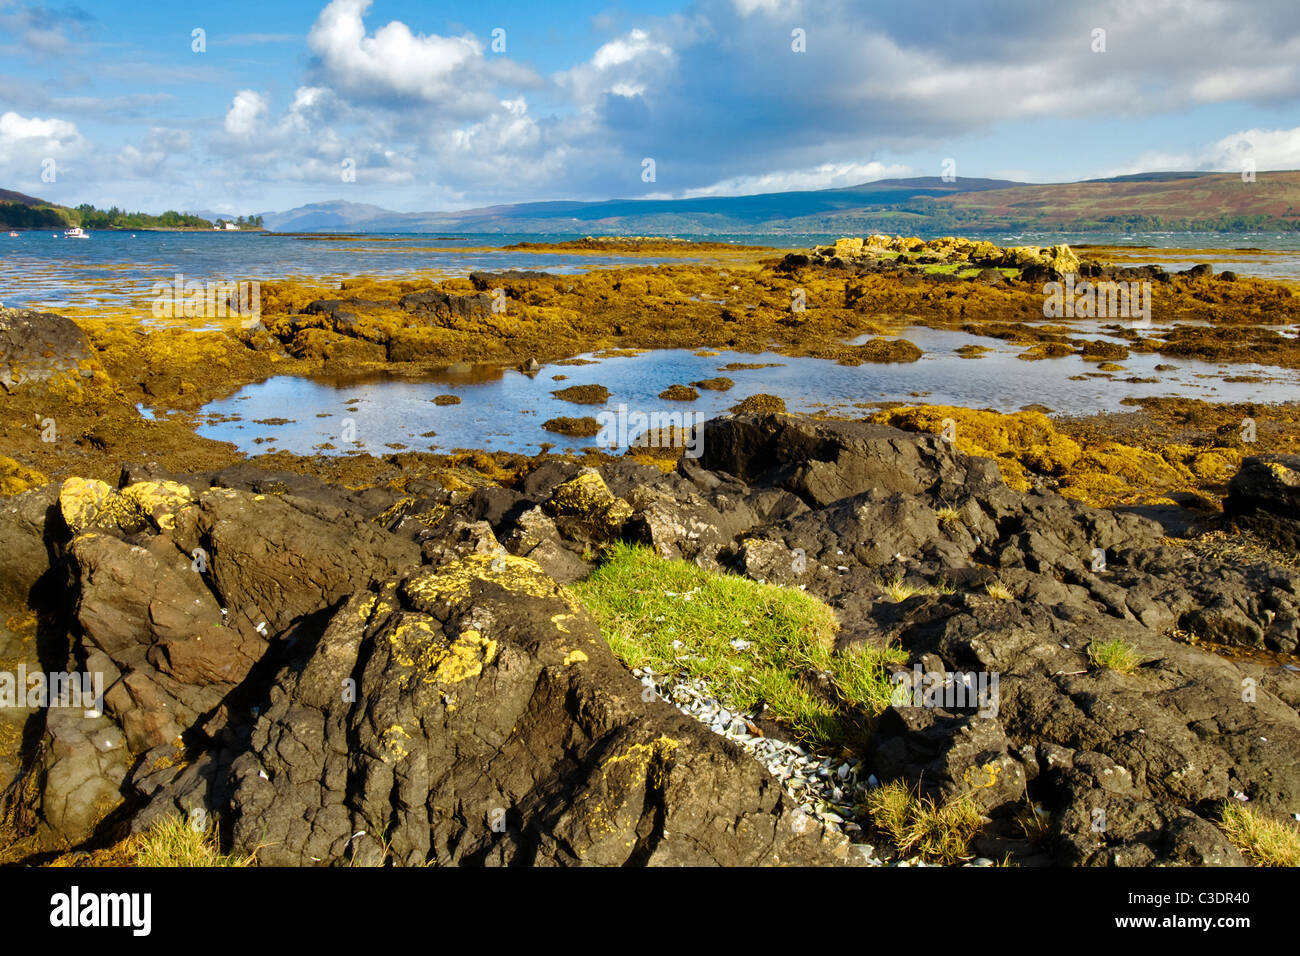 Low tide showing colourful seaweed along coast line near Salen on the Sound of Mull, taken on a birght sunny autumn day Stock Photo